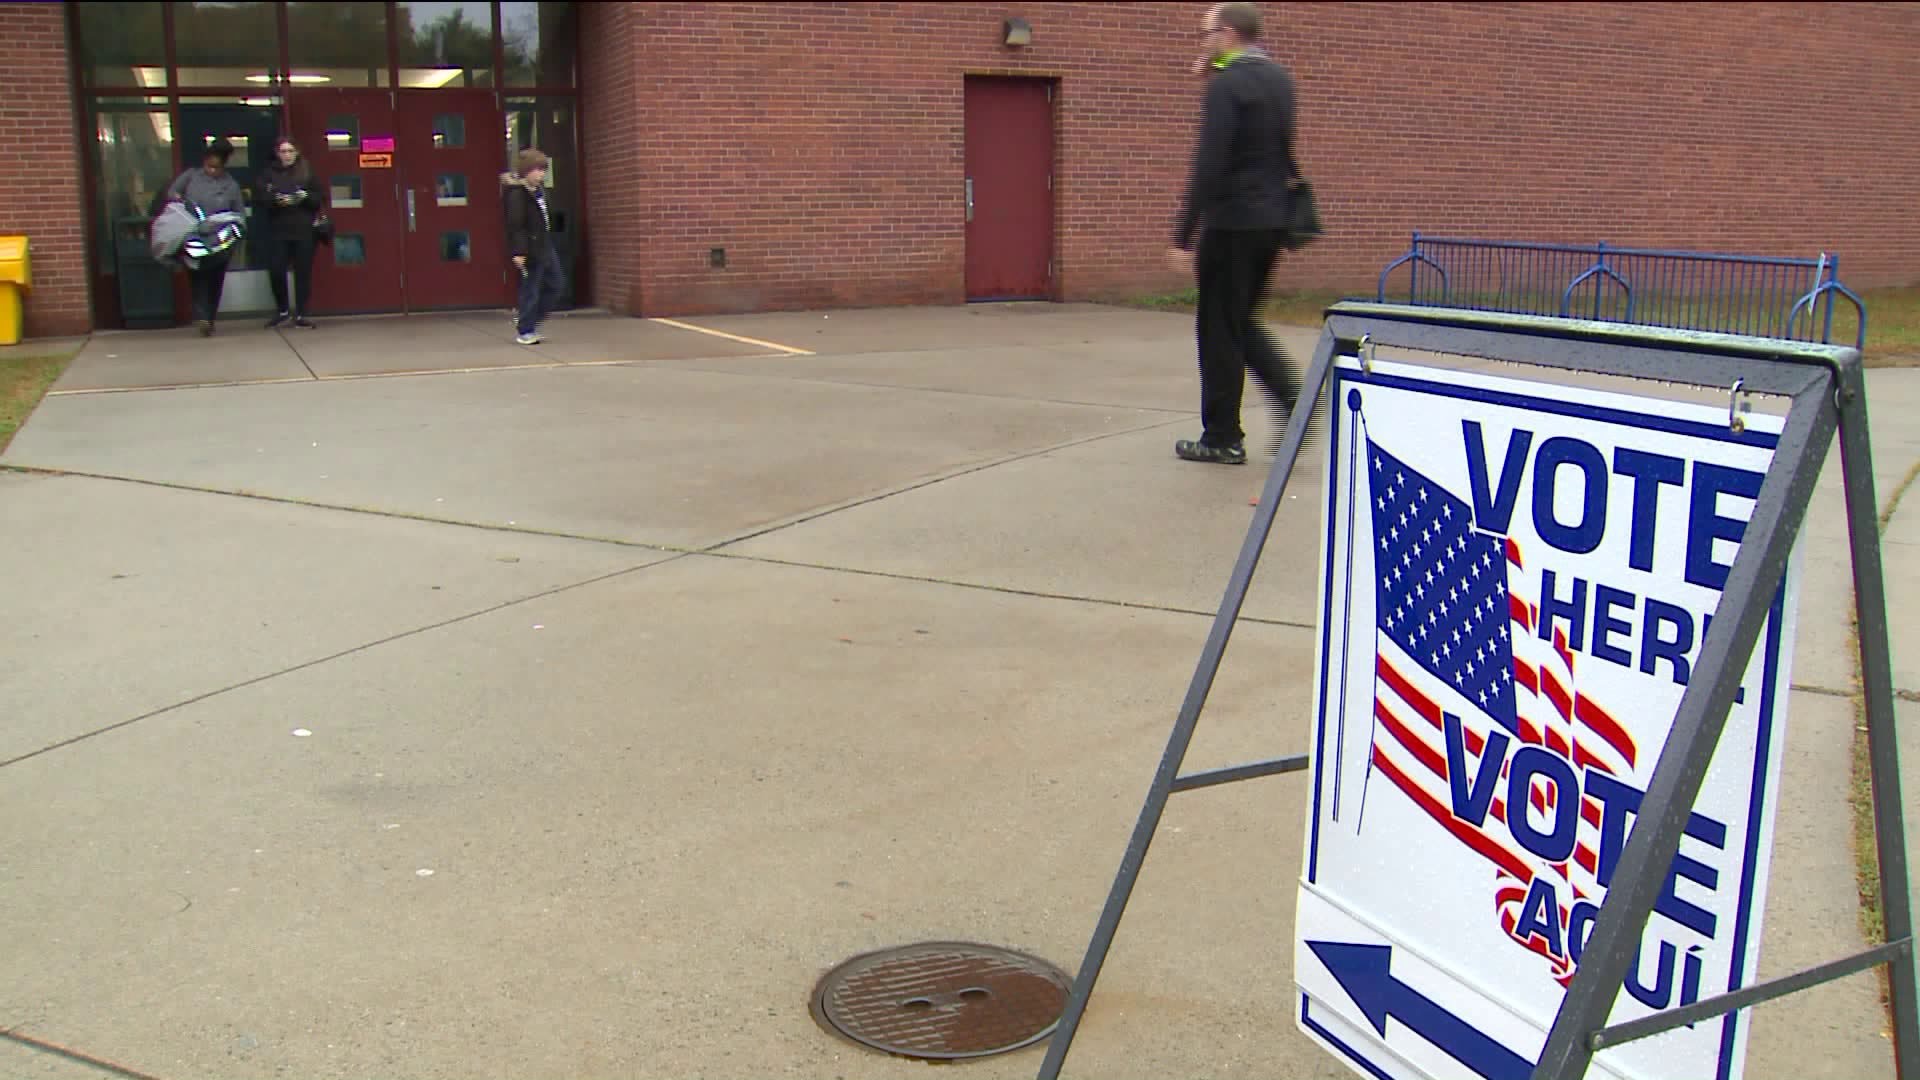 Election day balloting issues casts shadow on integrity of the system